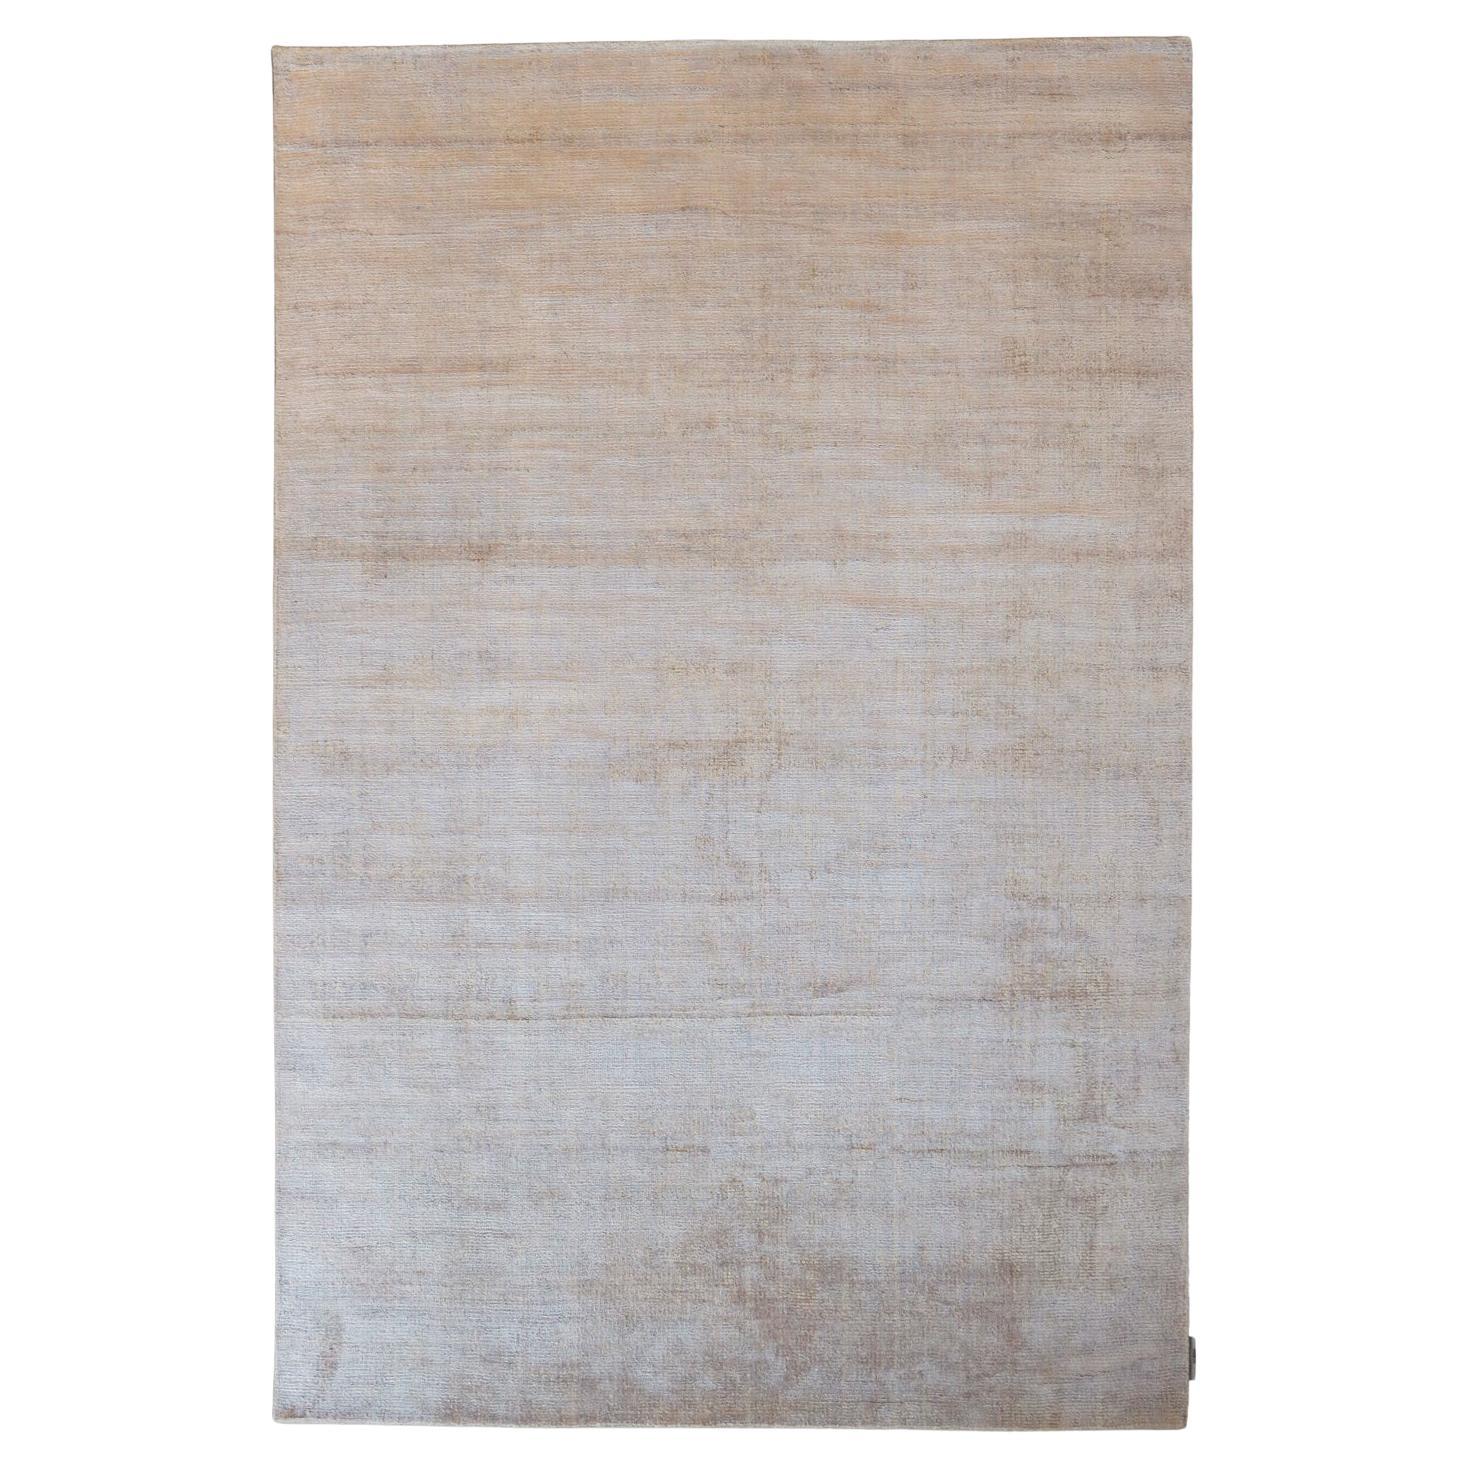 Contemporary Patterned New Zealand Wool Rug by Deanna Comellini 200x300 ...